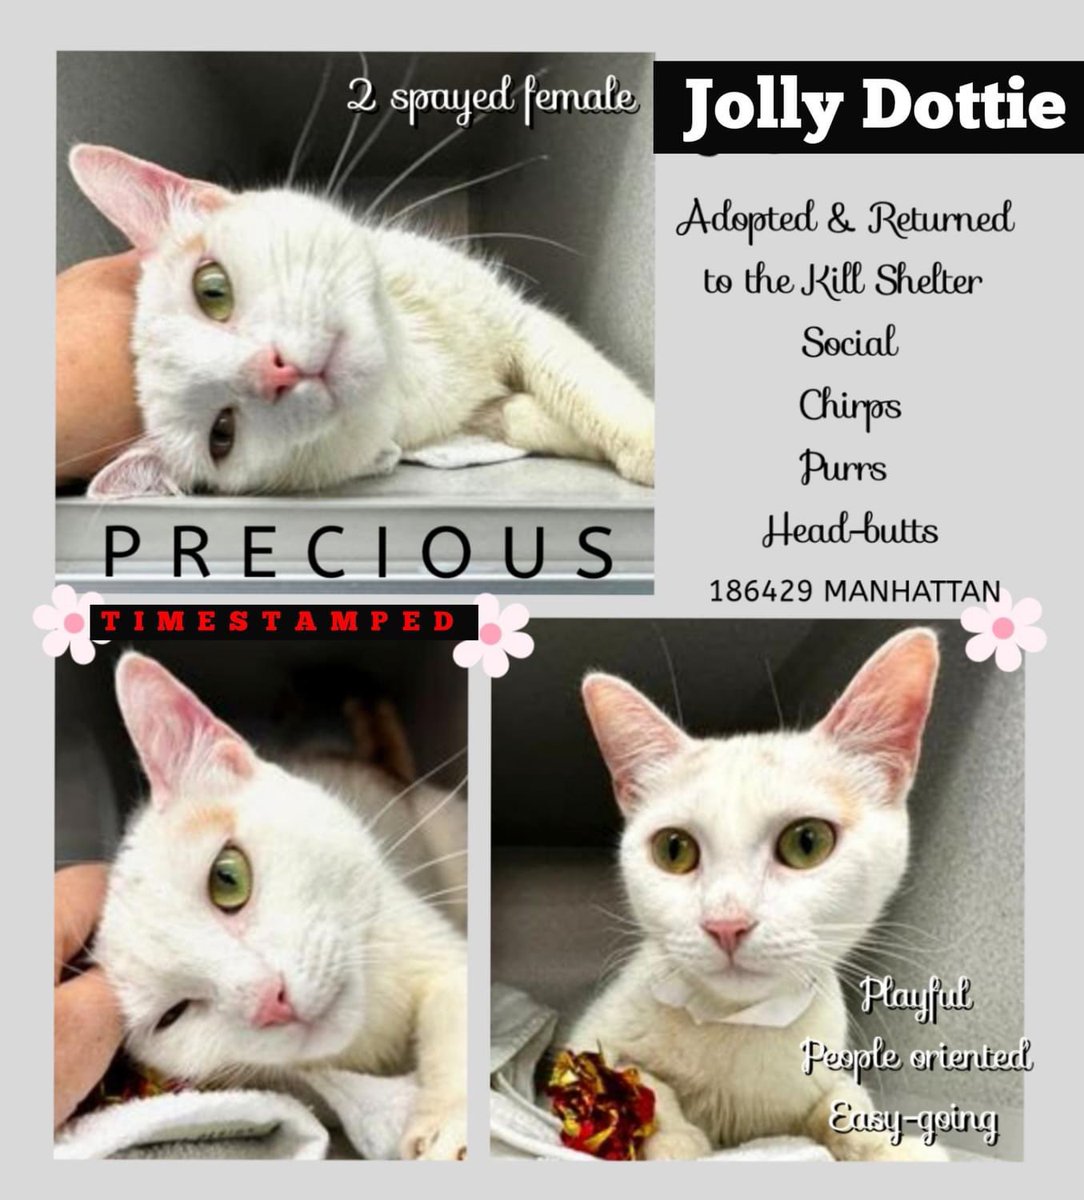 🆘Please RT-adopt-foster! 🆘 JOLLY DOTTY is on the “emergency placement” list at #ACCNYC and needs out of the shelter by 12 NOON 5/2! #URGENT #NYC #CATS #NYCACC #TeamKittySOS #AdoptDontShop #CatsOfTwitter newhope.shelterbuddy.com/Animal/Profile…